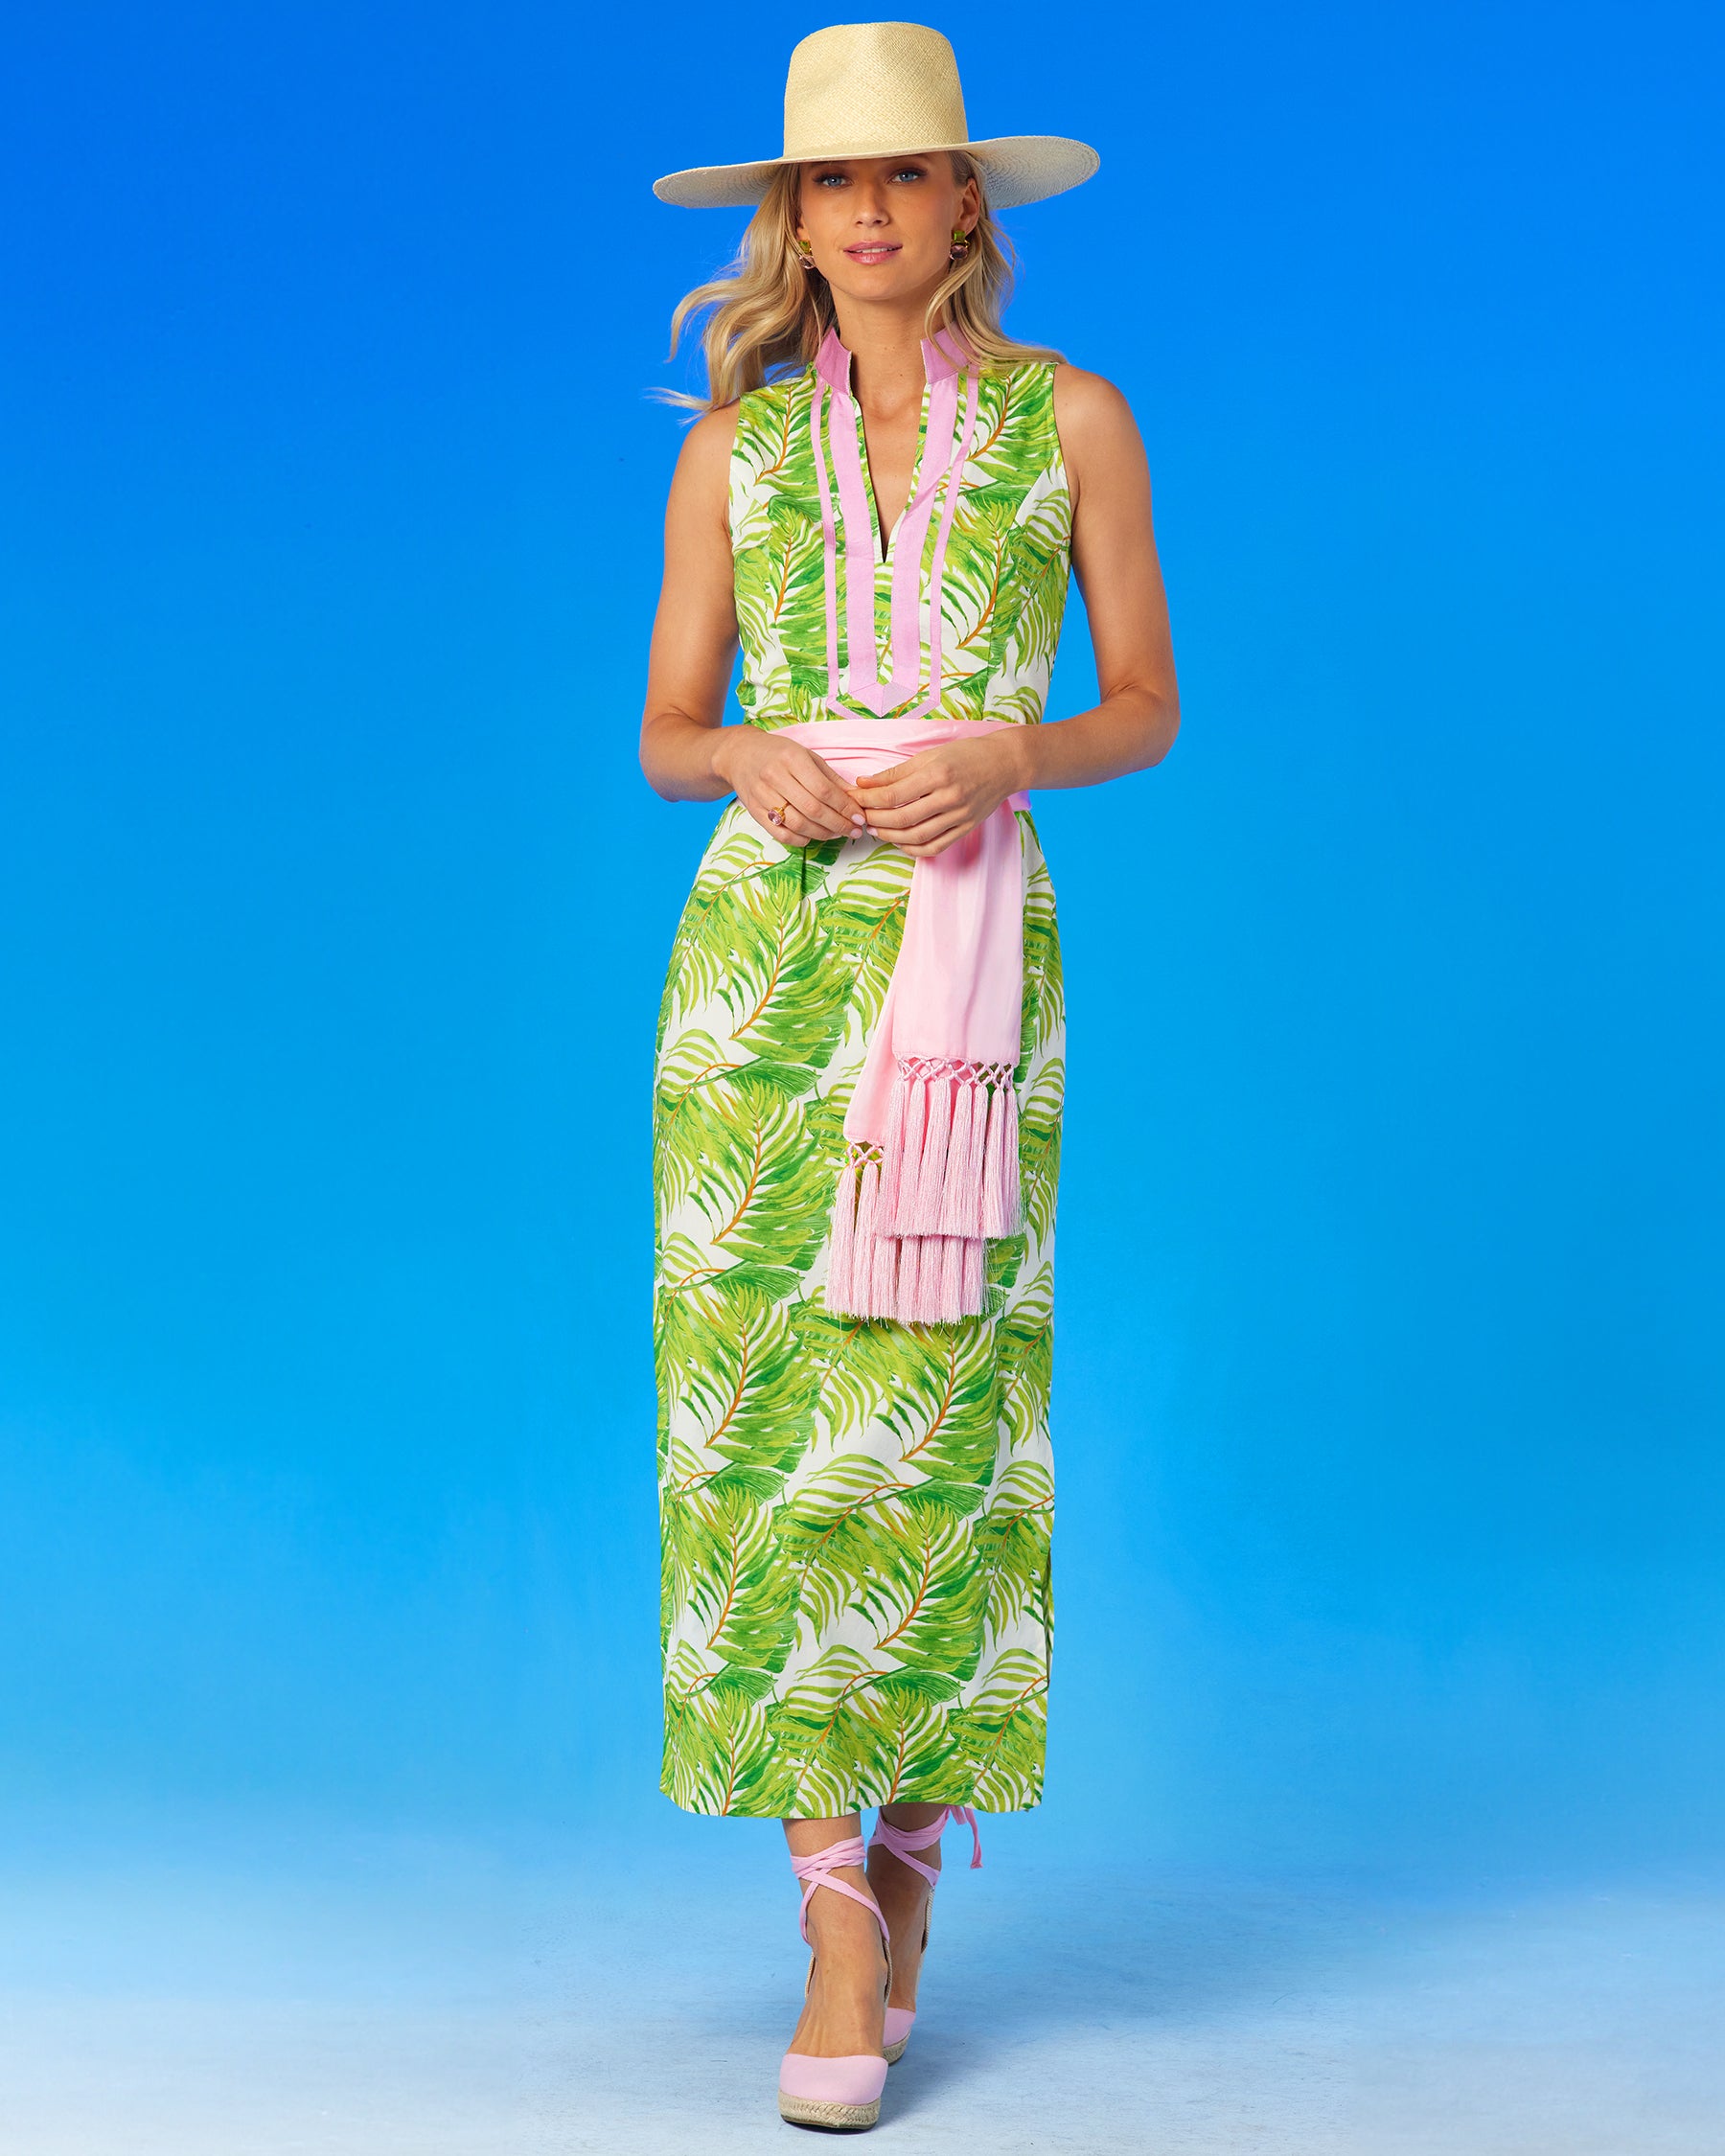 Ashley Sleeveless Long Dress in Undulating Palm Leaves-Worn with the Cosima Sash Belt in Blush Pink and Straw Hat